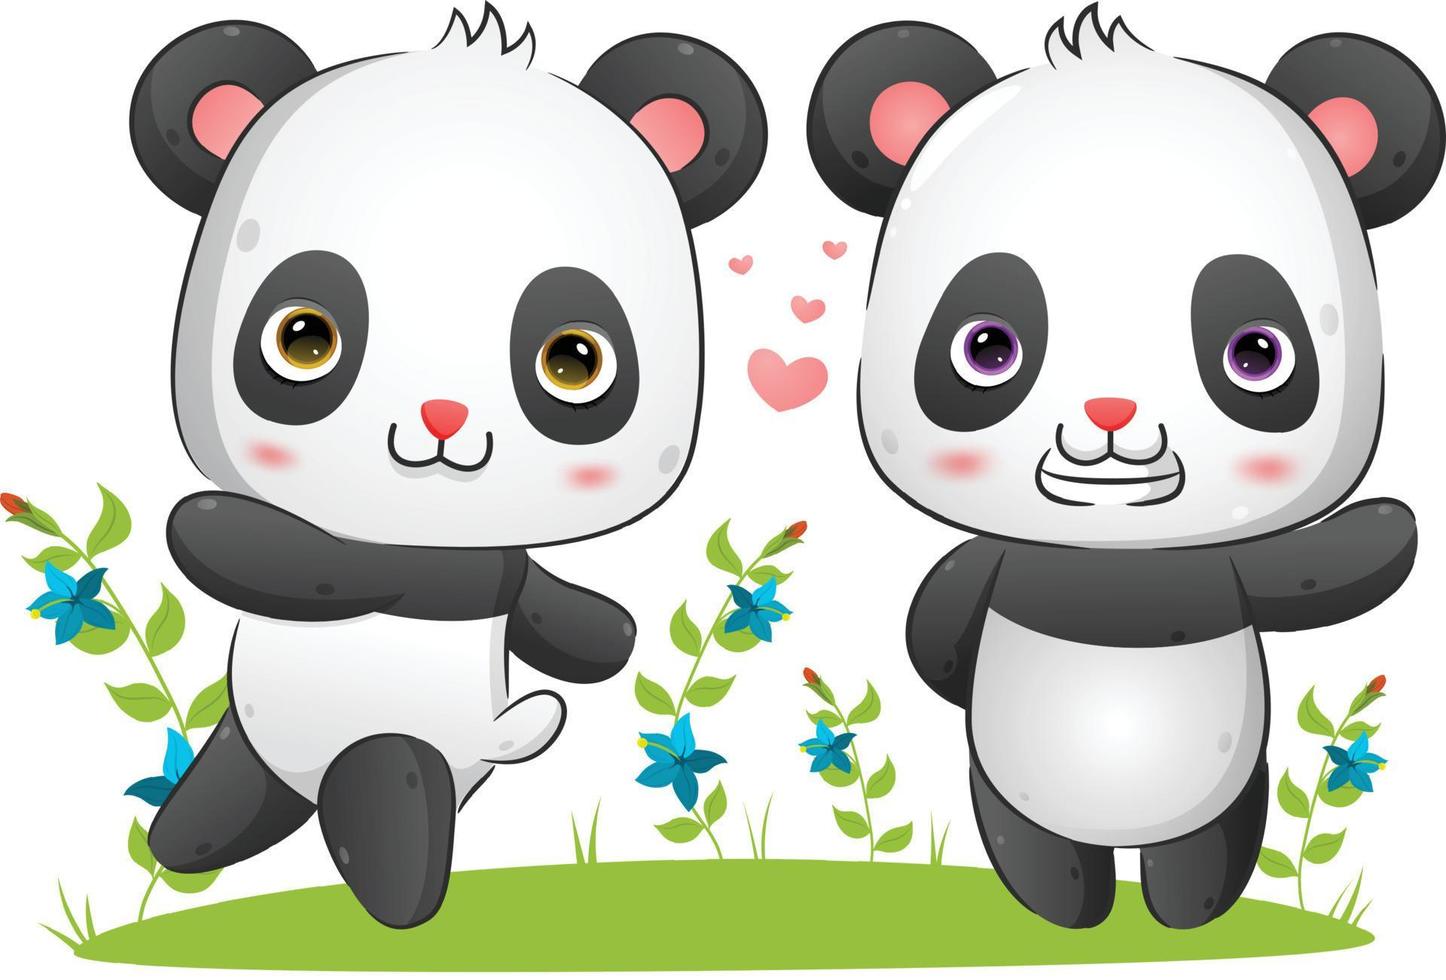 The couple of panda is running and playing in the park together vector